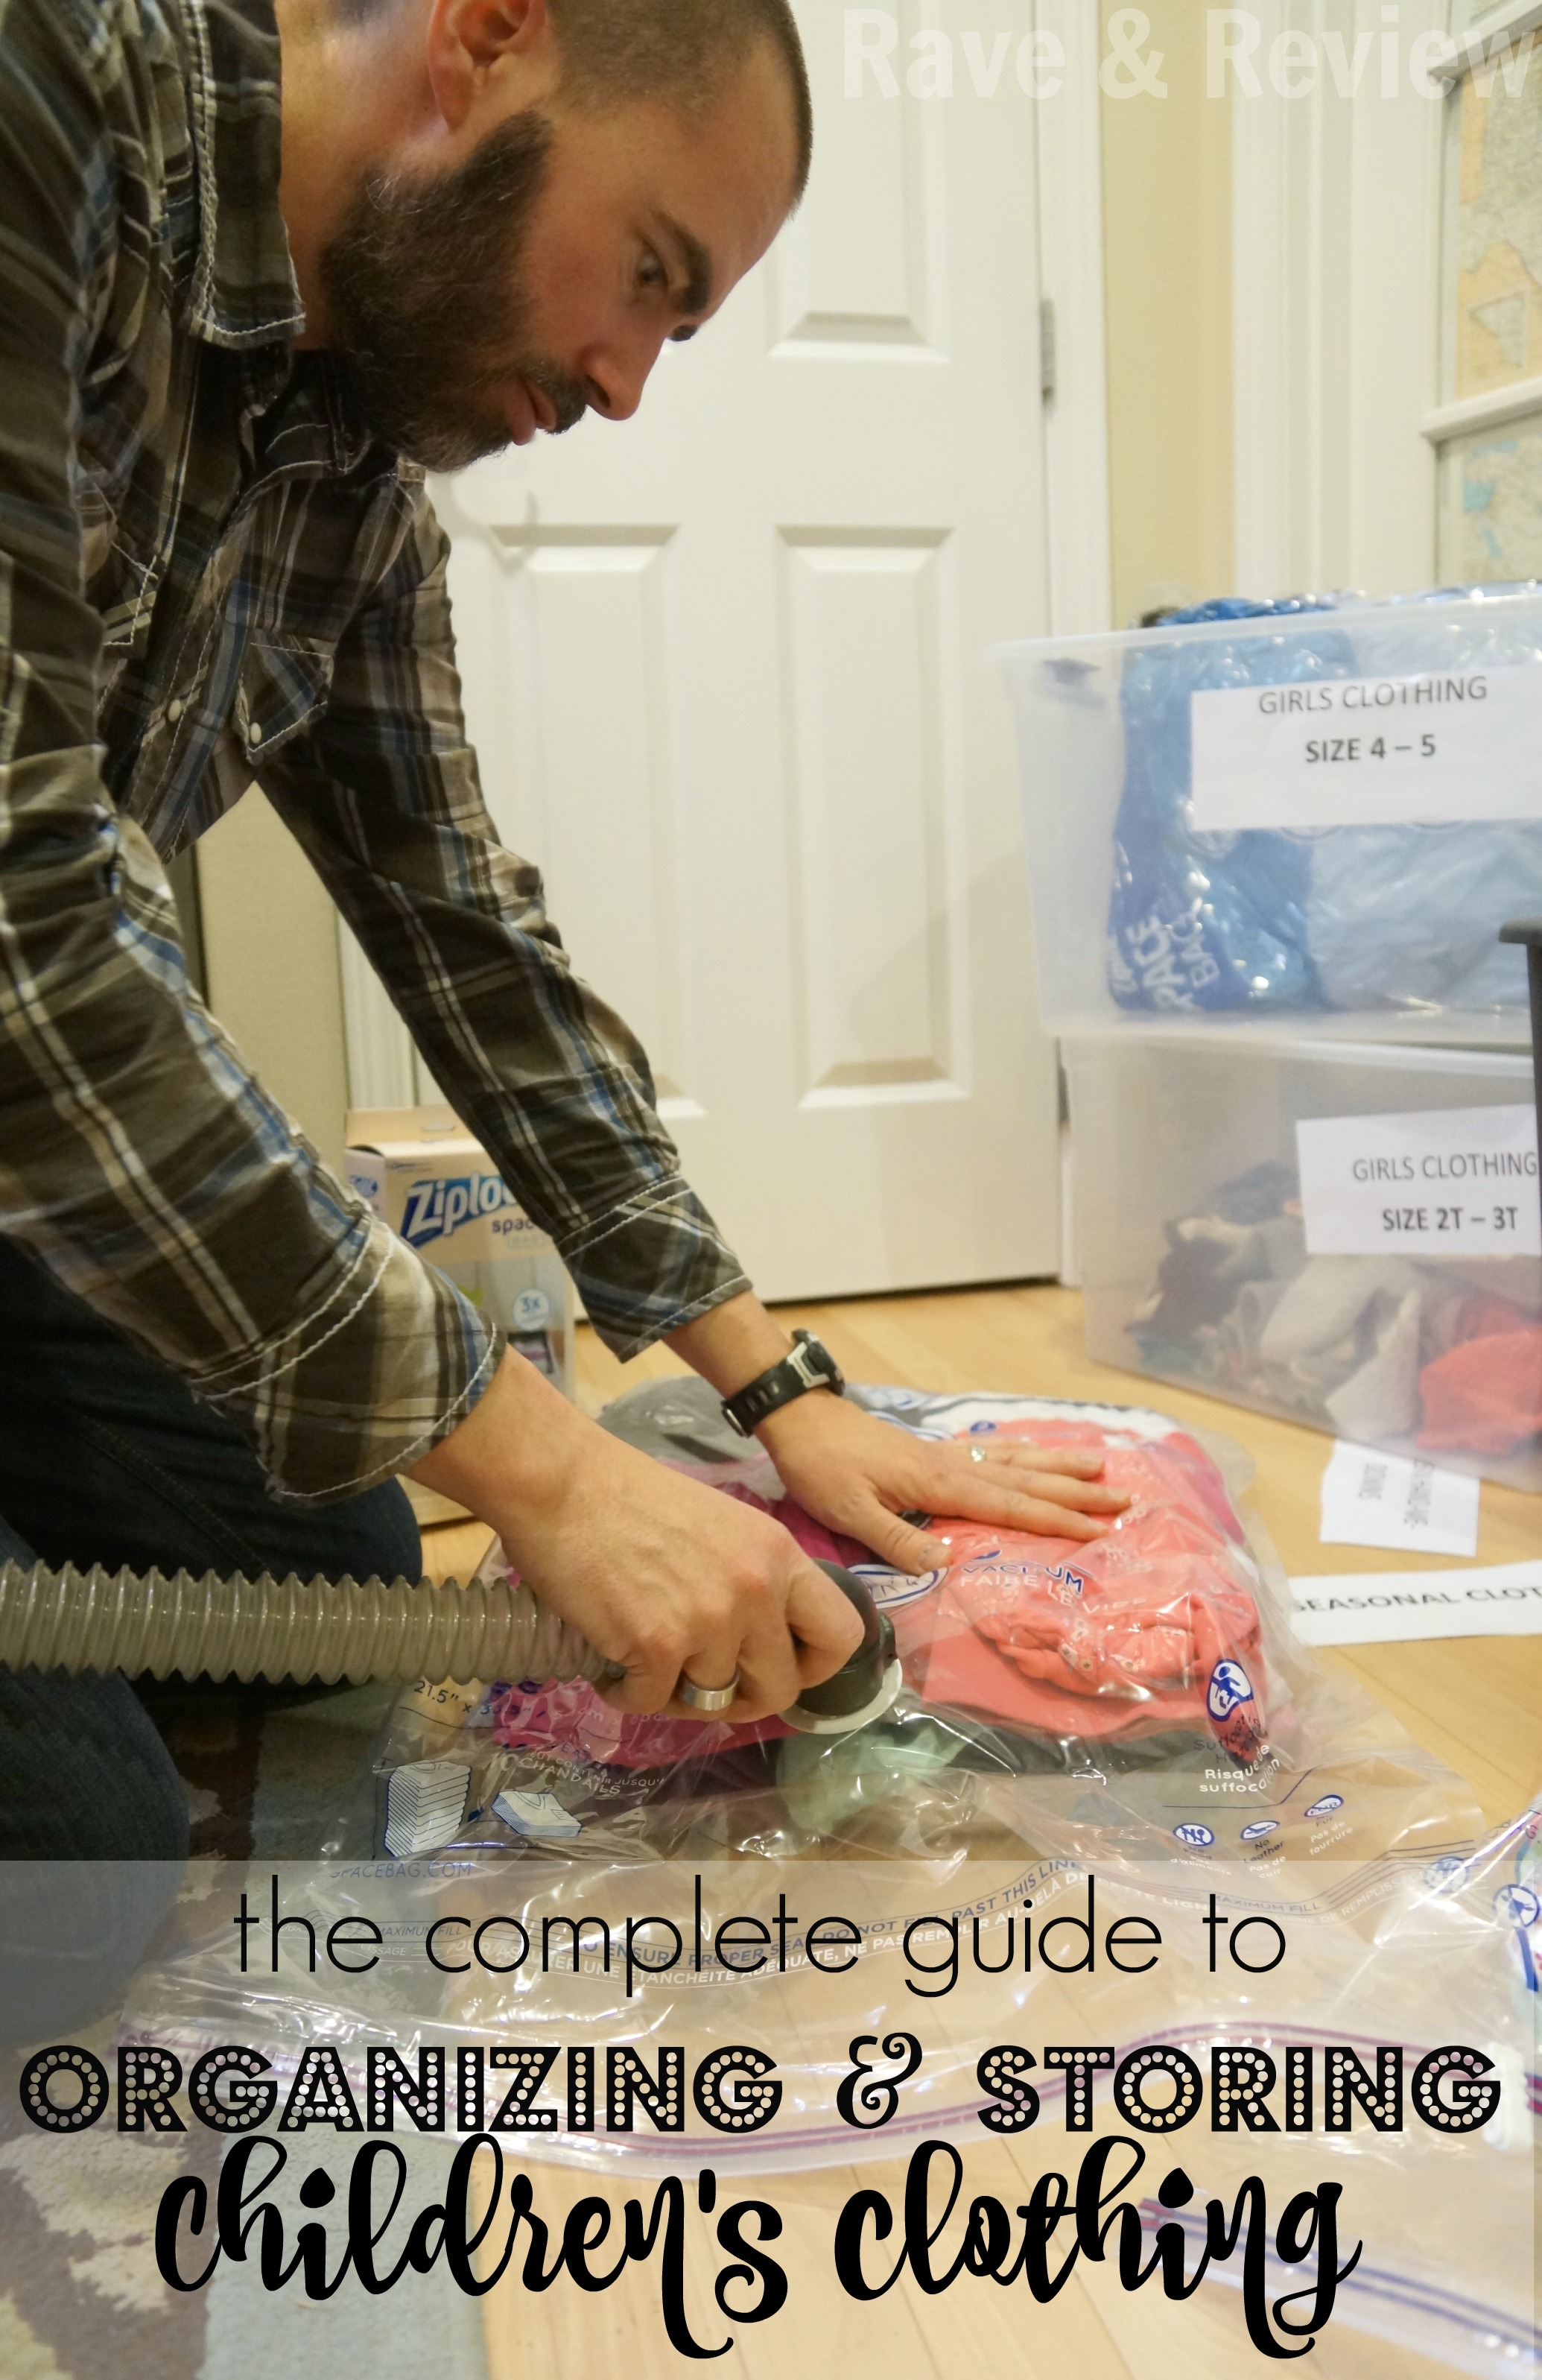 How Many of Each Size Baby Clothes: The Ultimate Guide